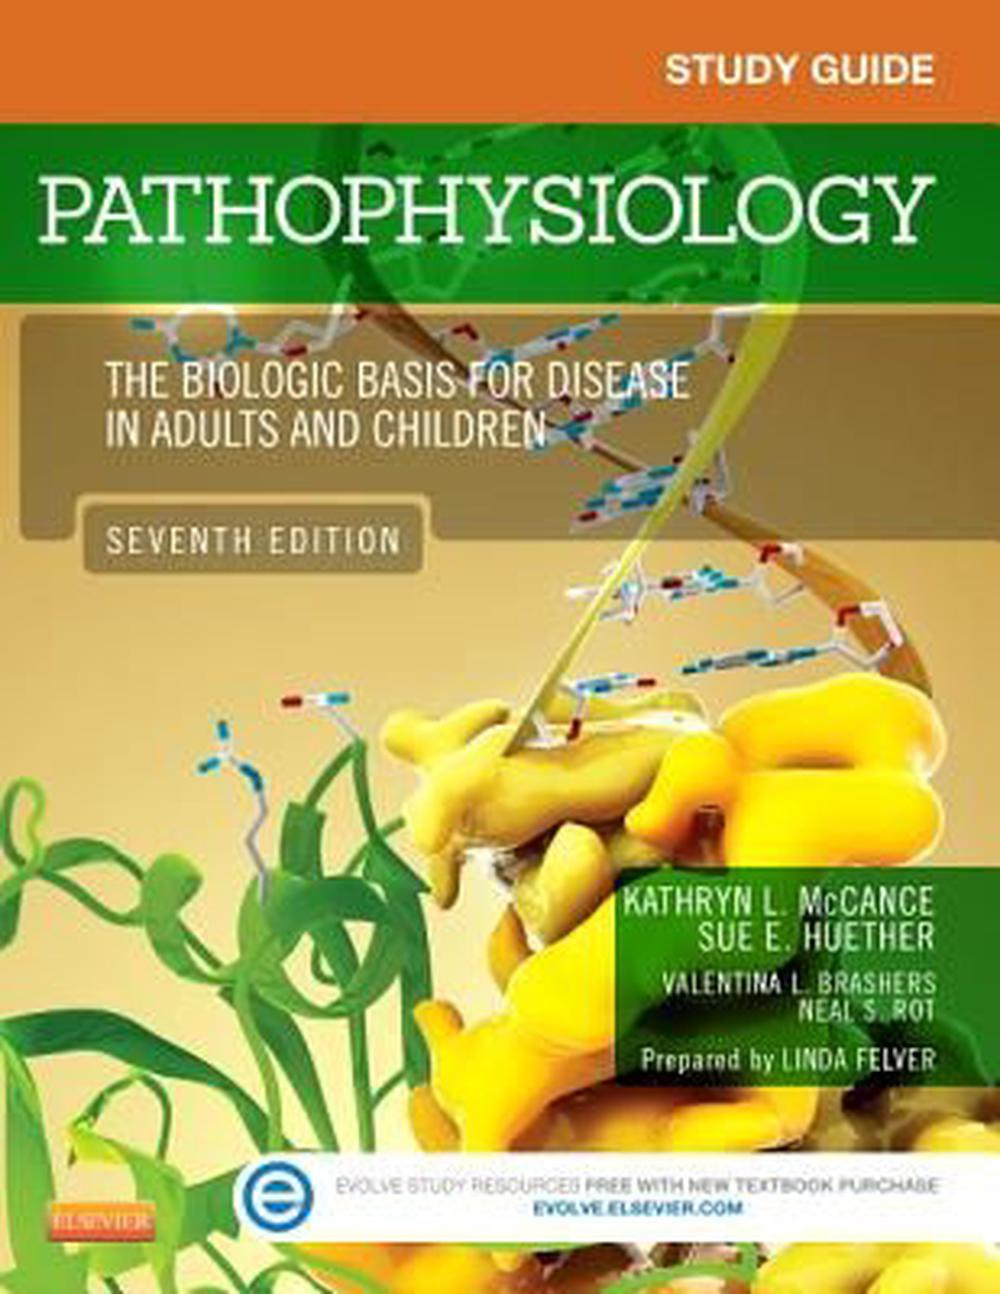 Study Guide for Pathophysiology by Kathryn L. McCance, Paperback